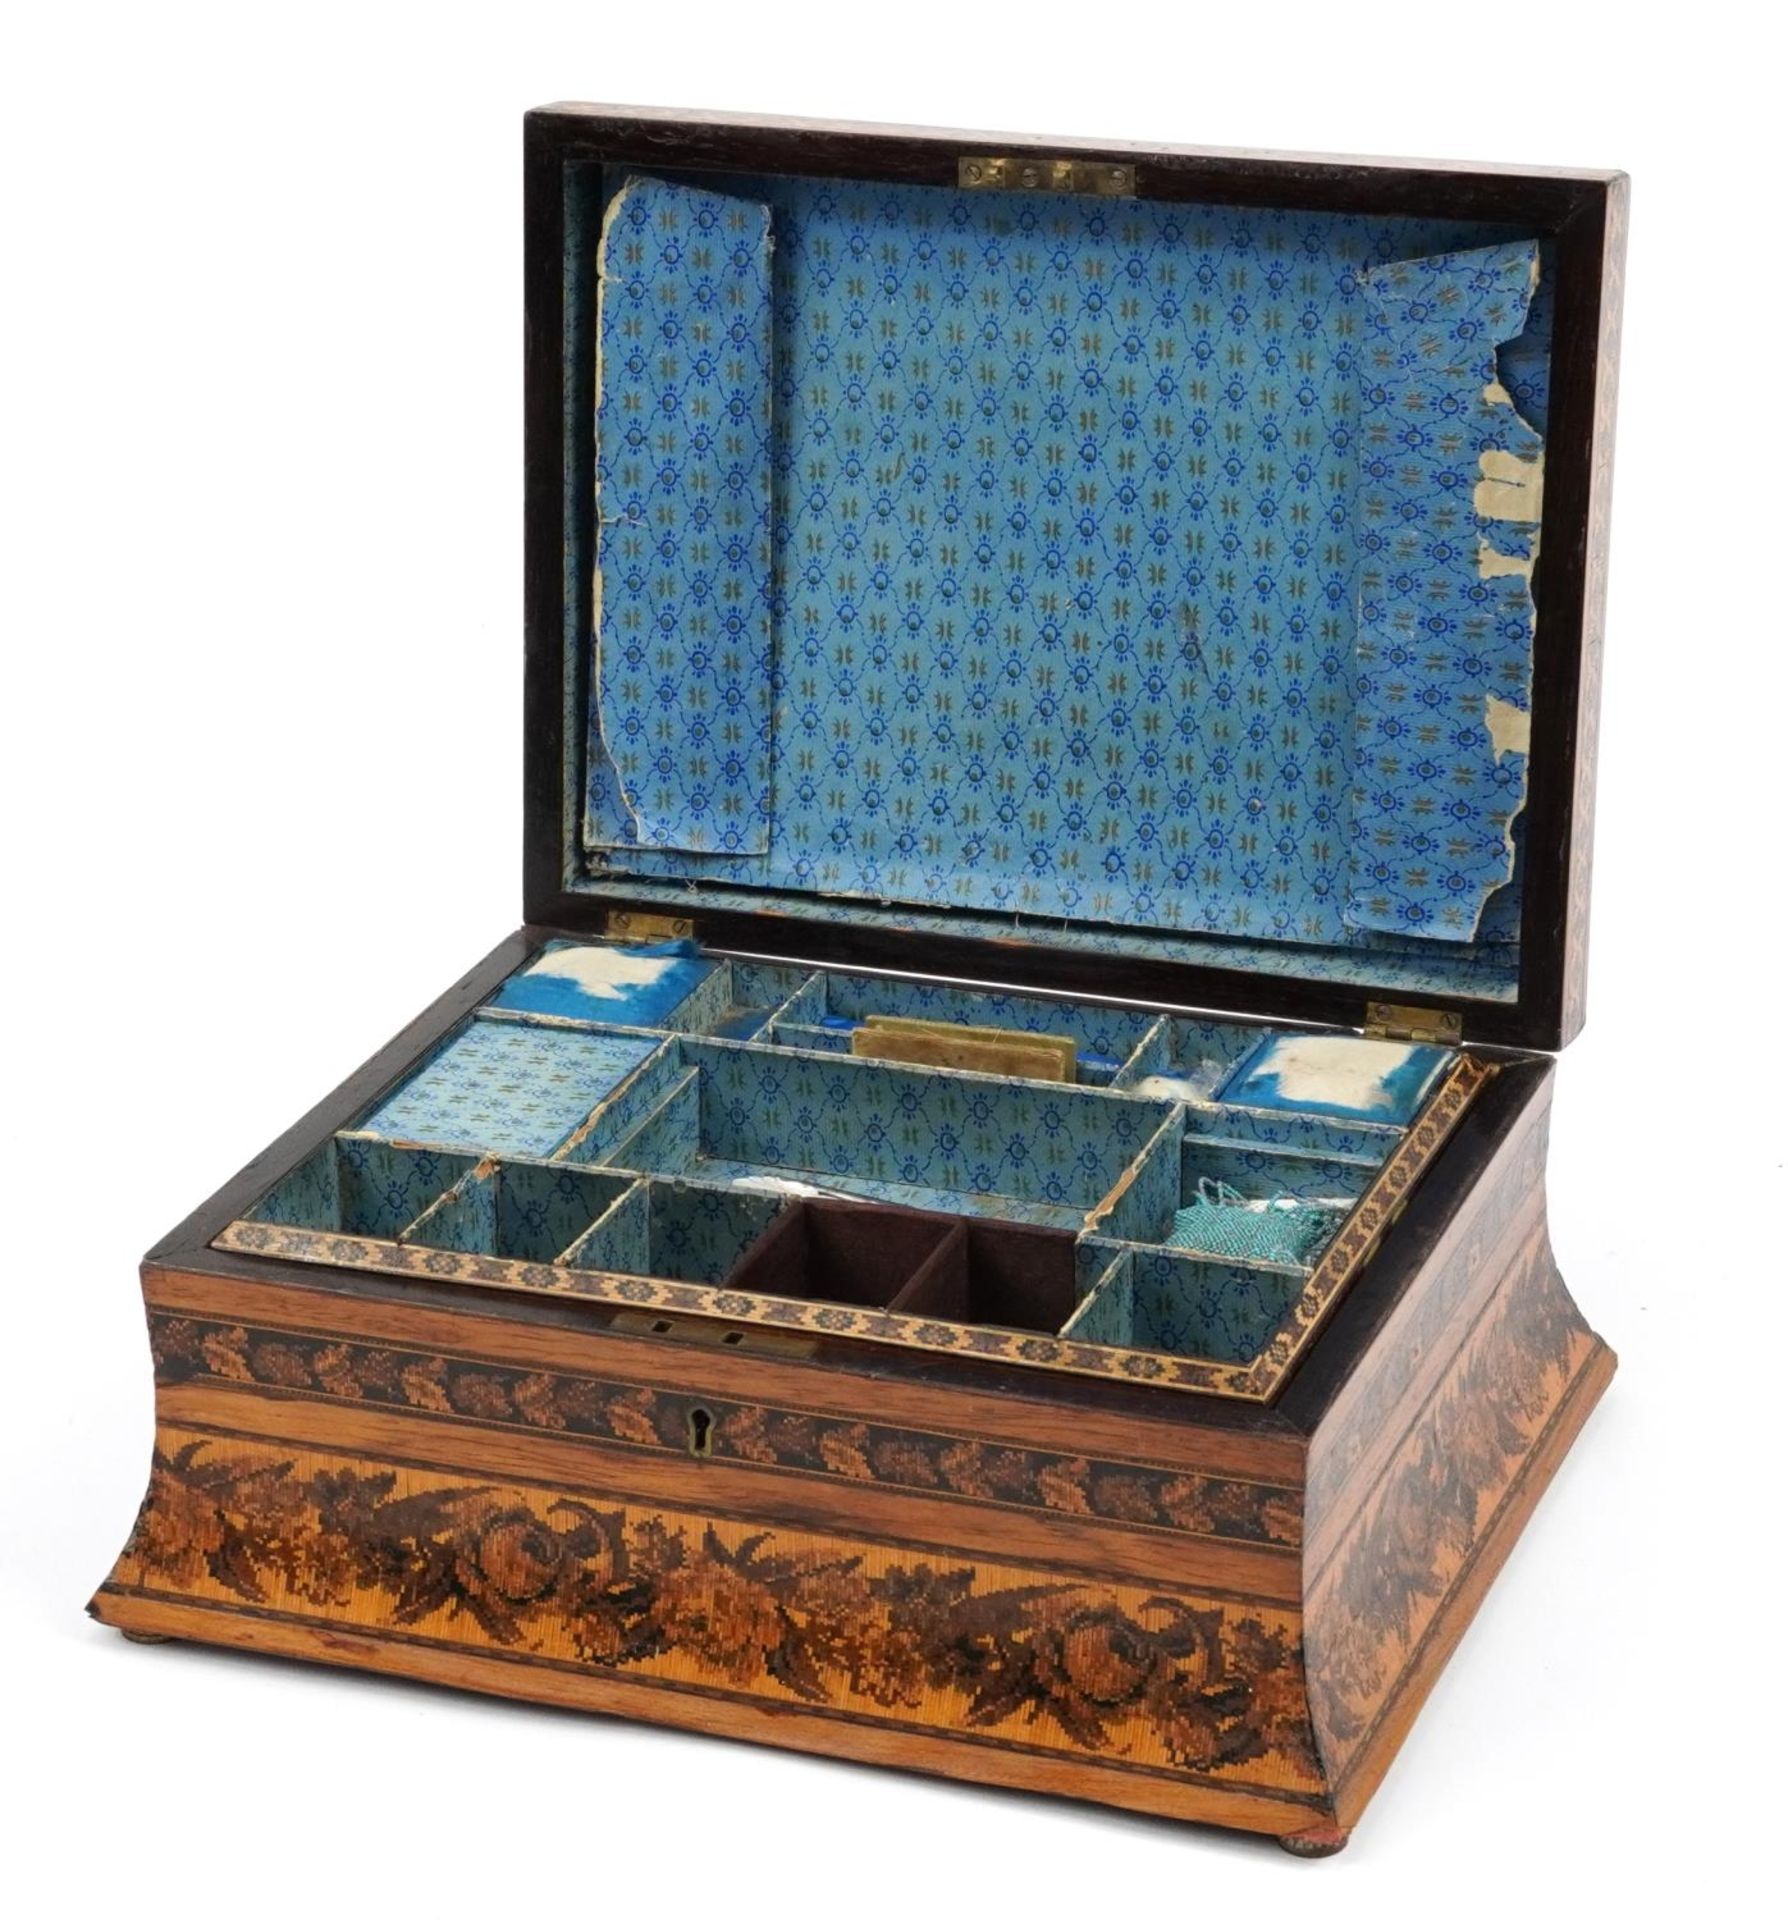 Victorian Tunbridge Ware rosewood sewing workbox with fitted lift out interior and hinged lid - Image 4 of 6